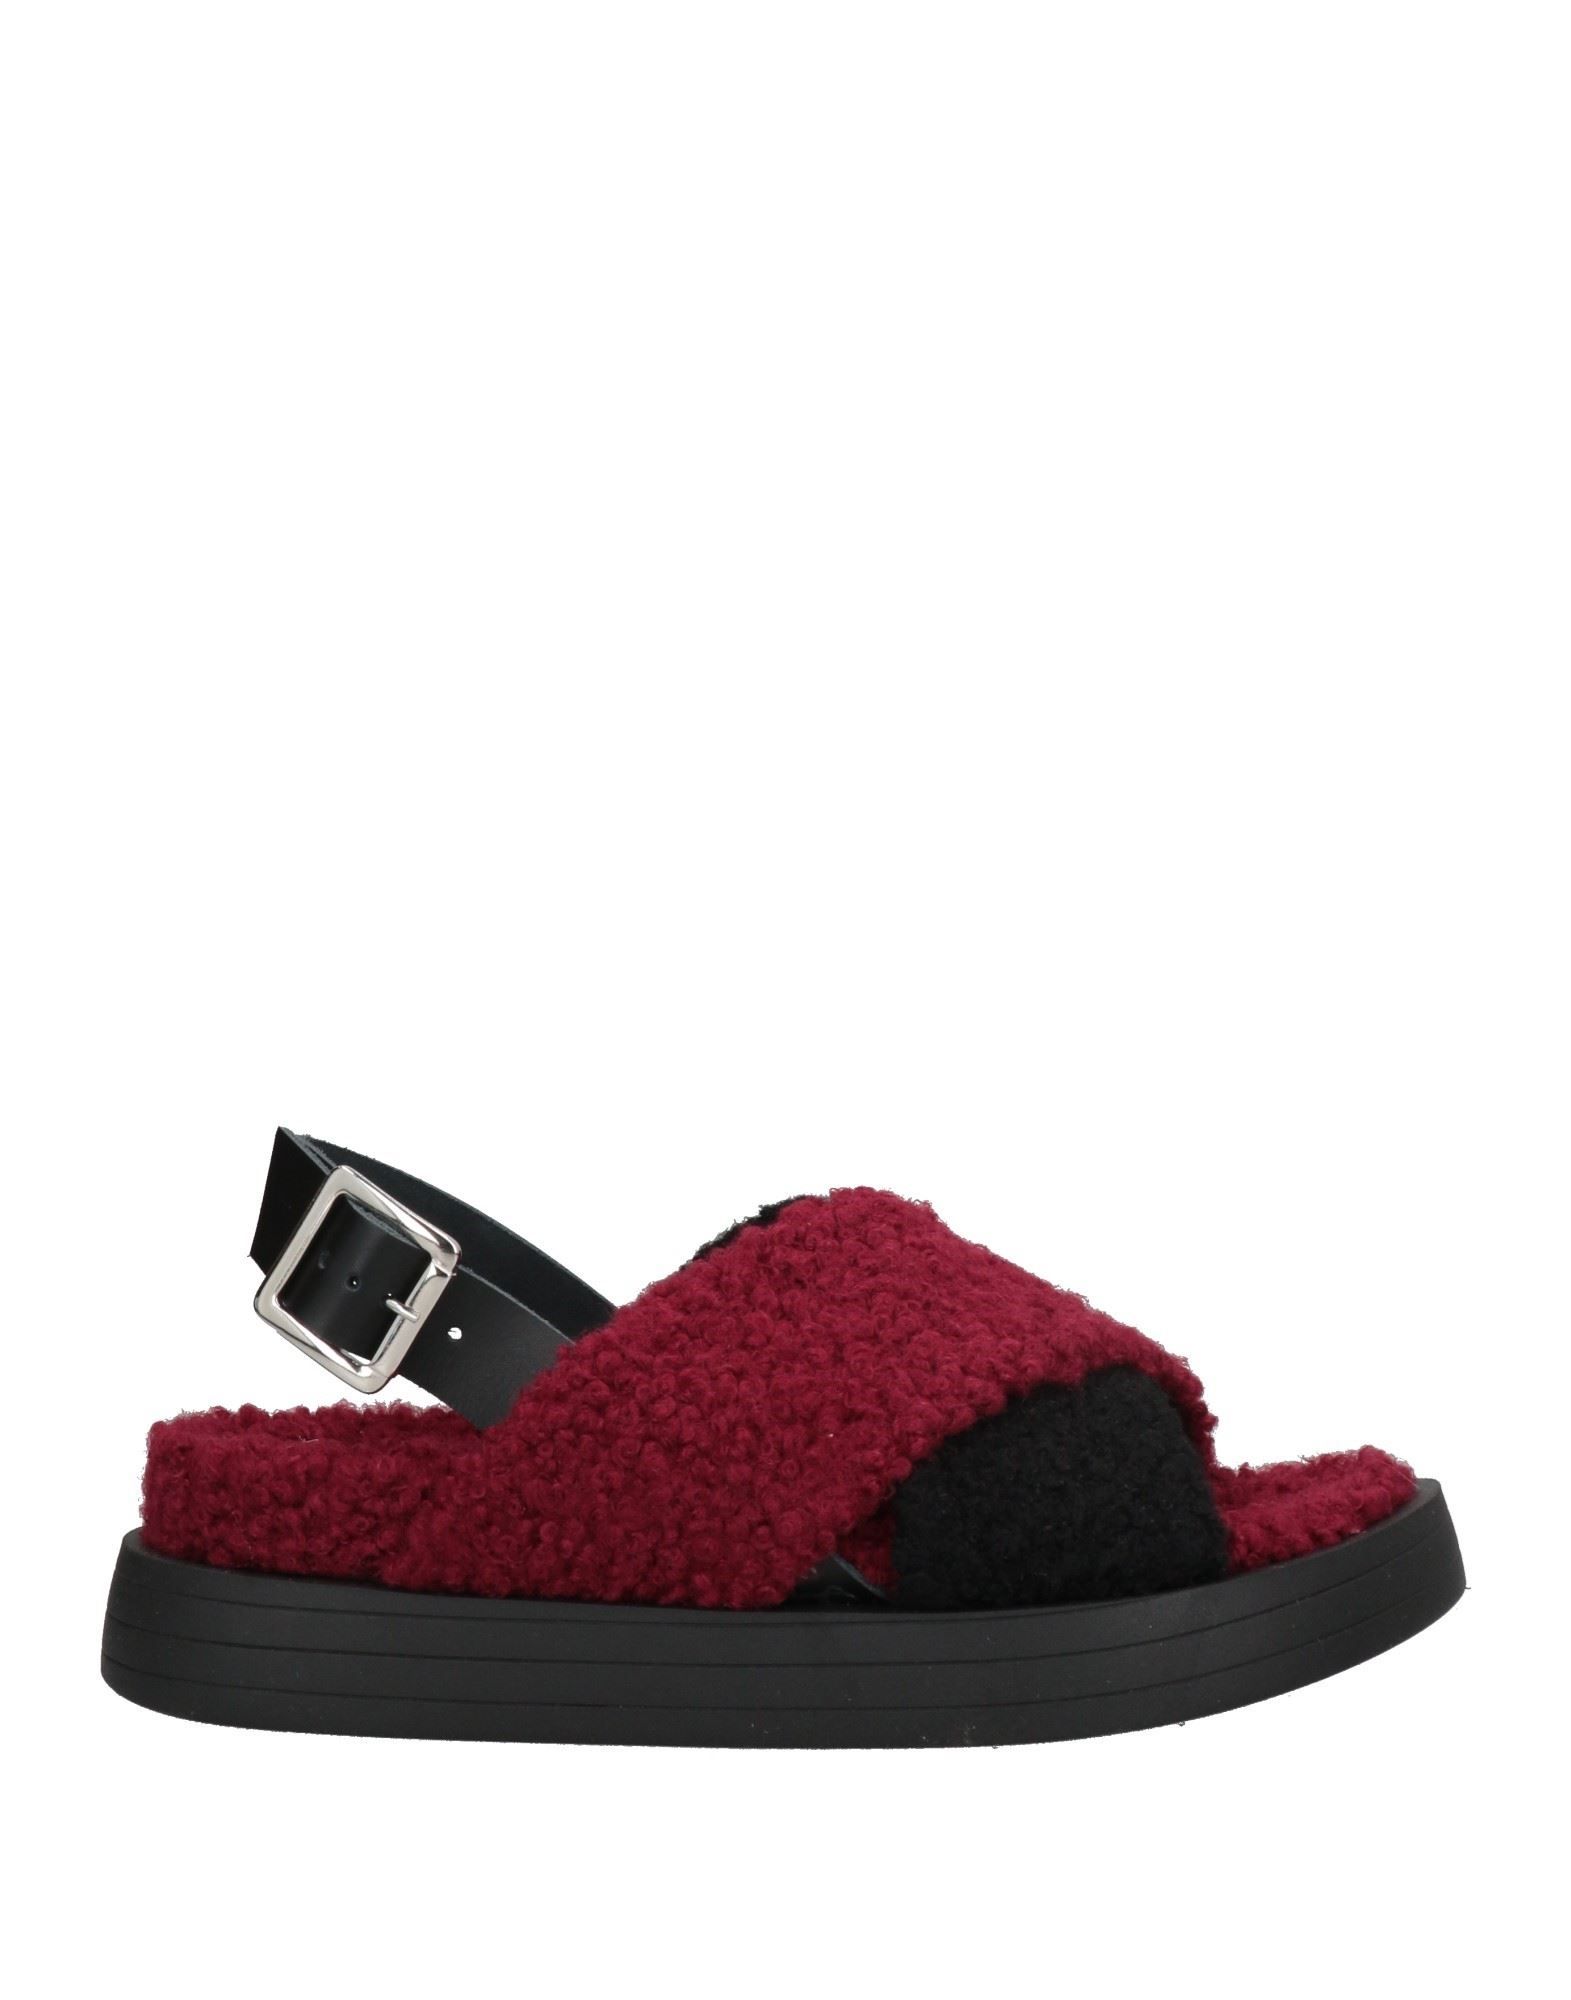 Islo Isabella Lorusso Sandals In Red